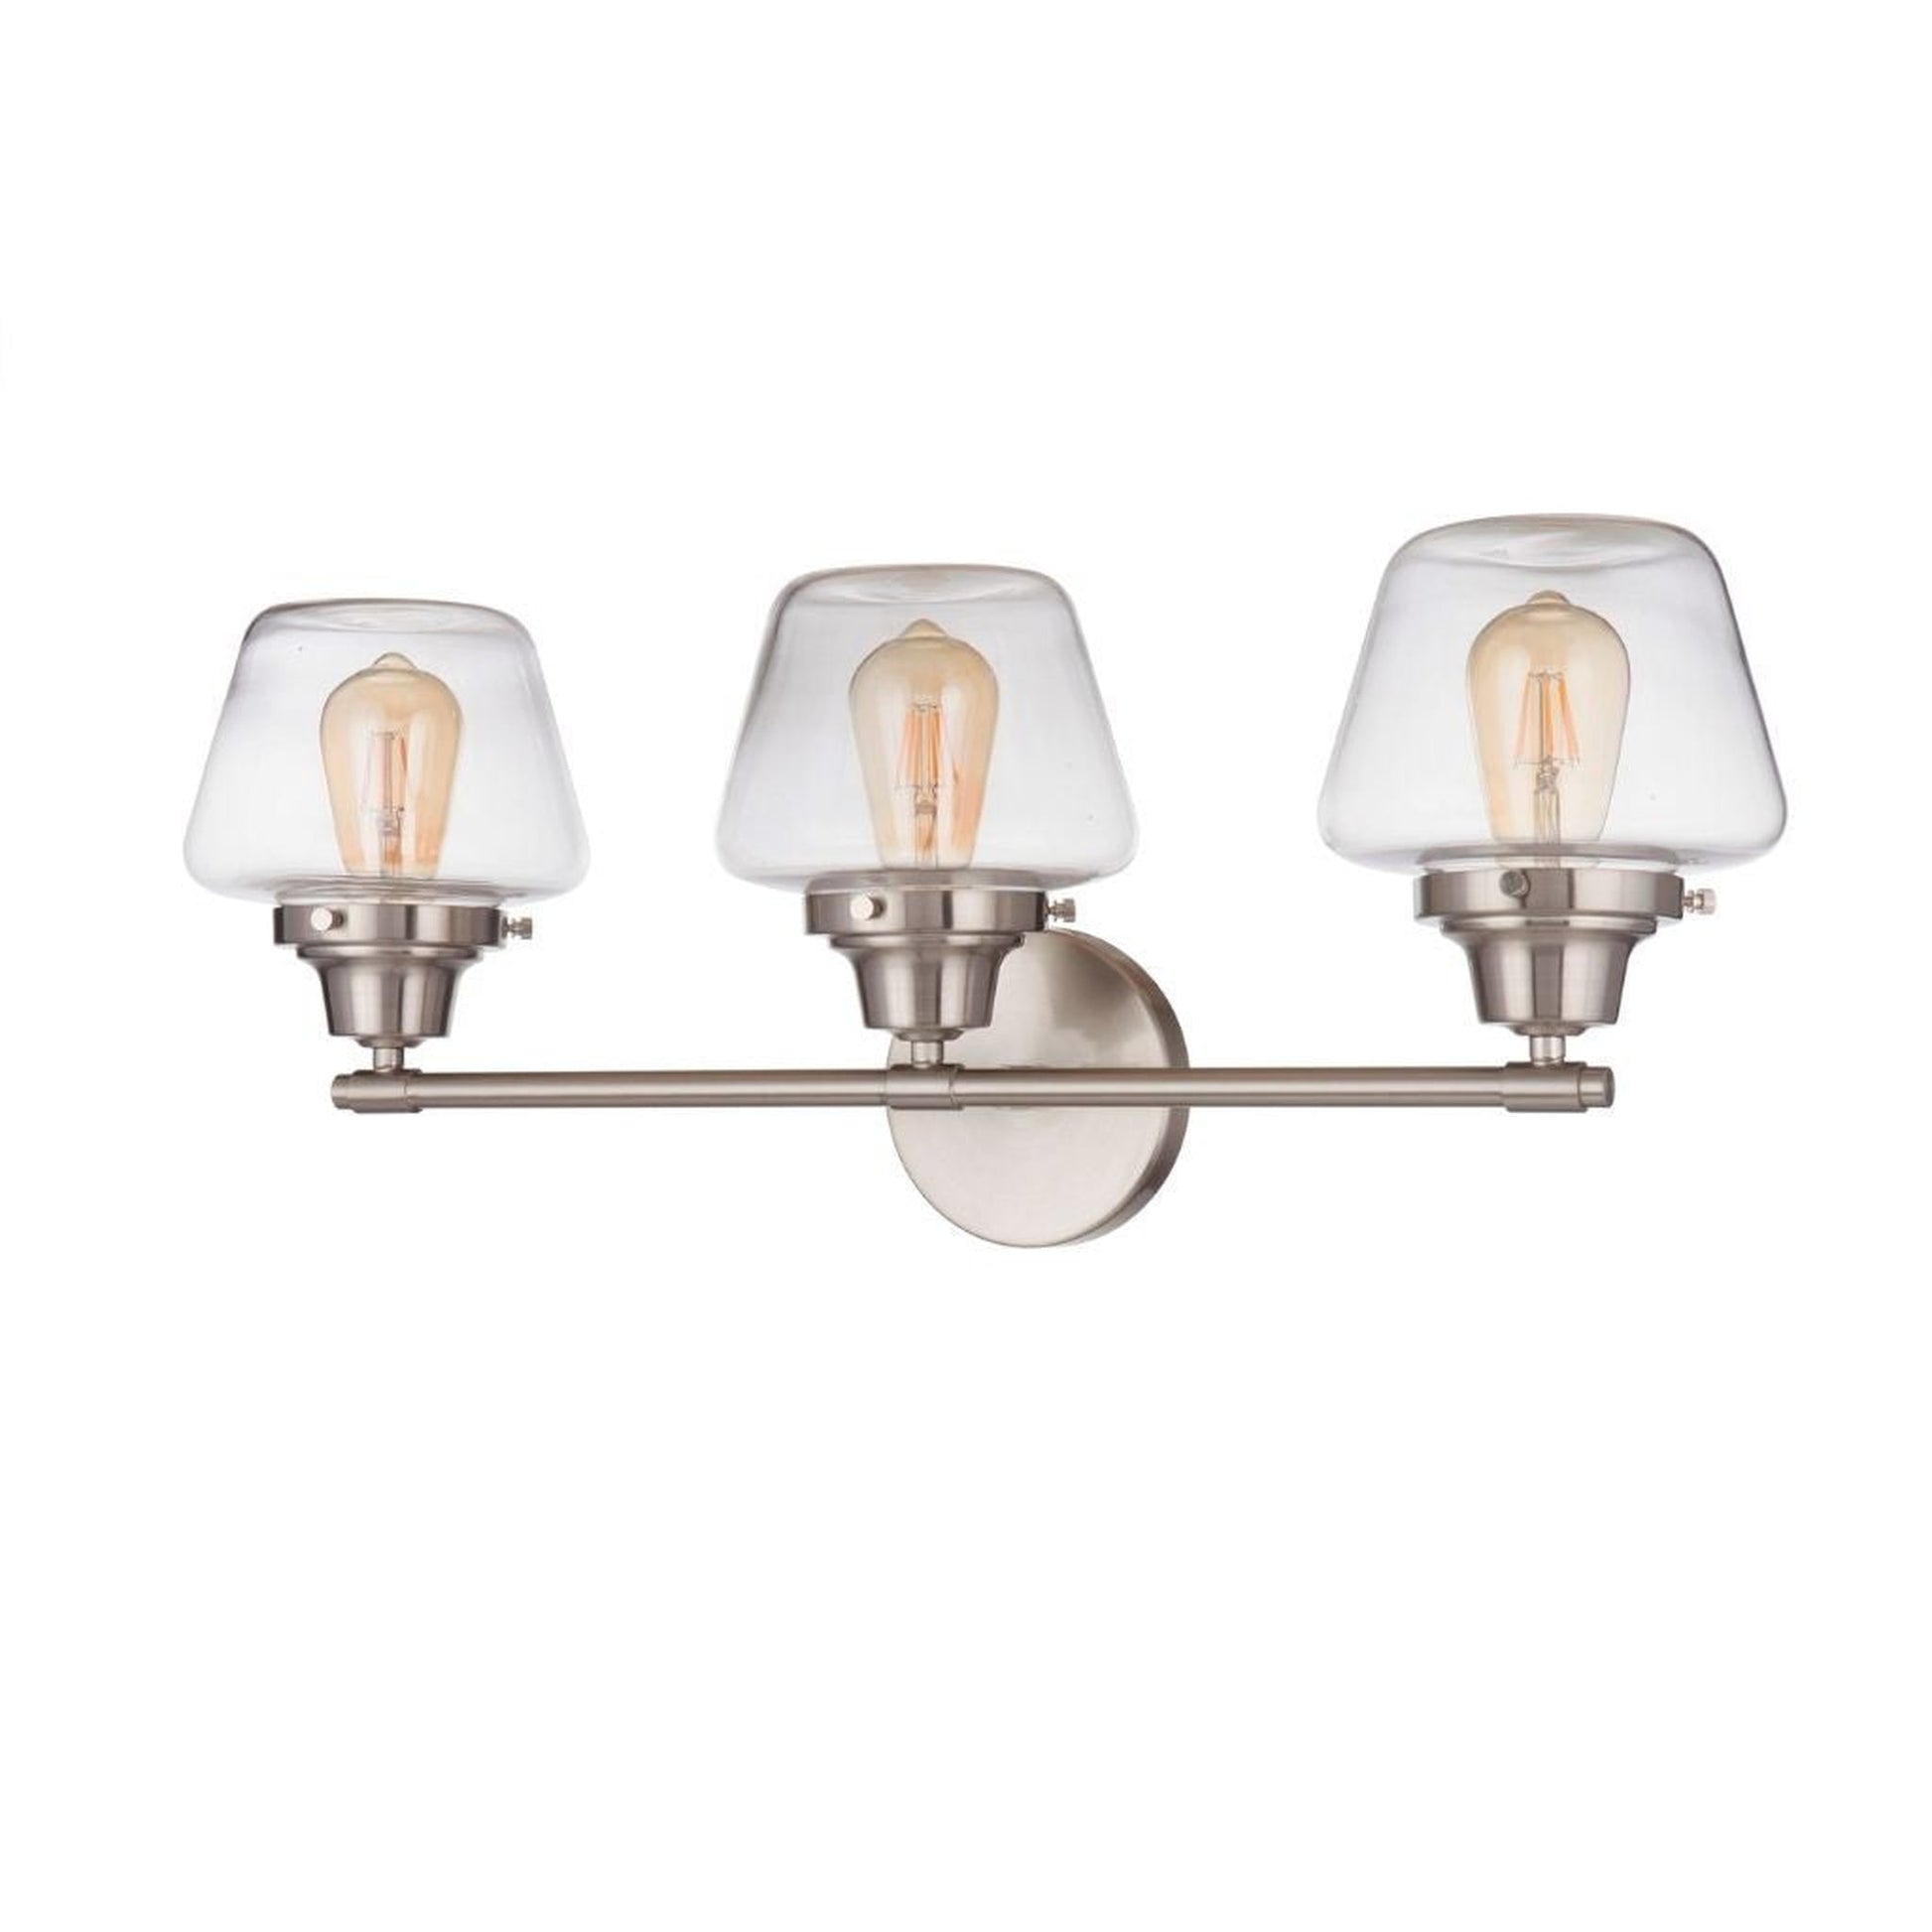 Craftmade Essex 28" 3-Light Brushed Polished Nickel Vanity Light With Clear Glass Shades